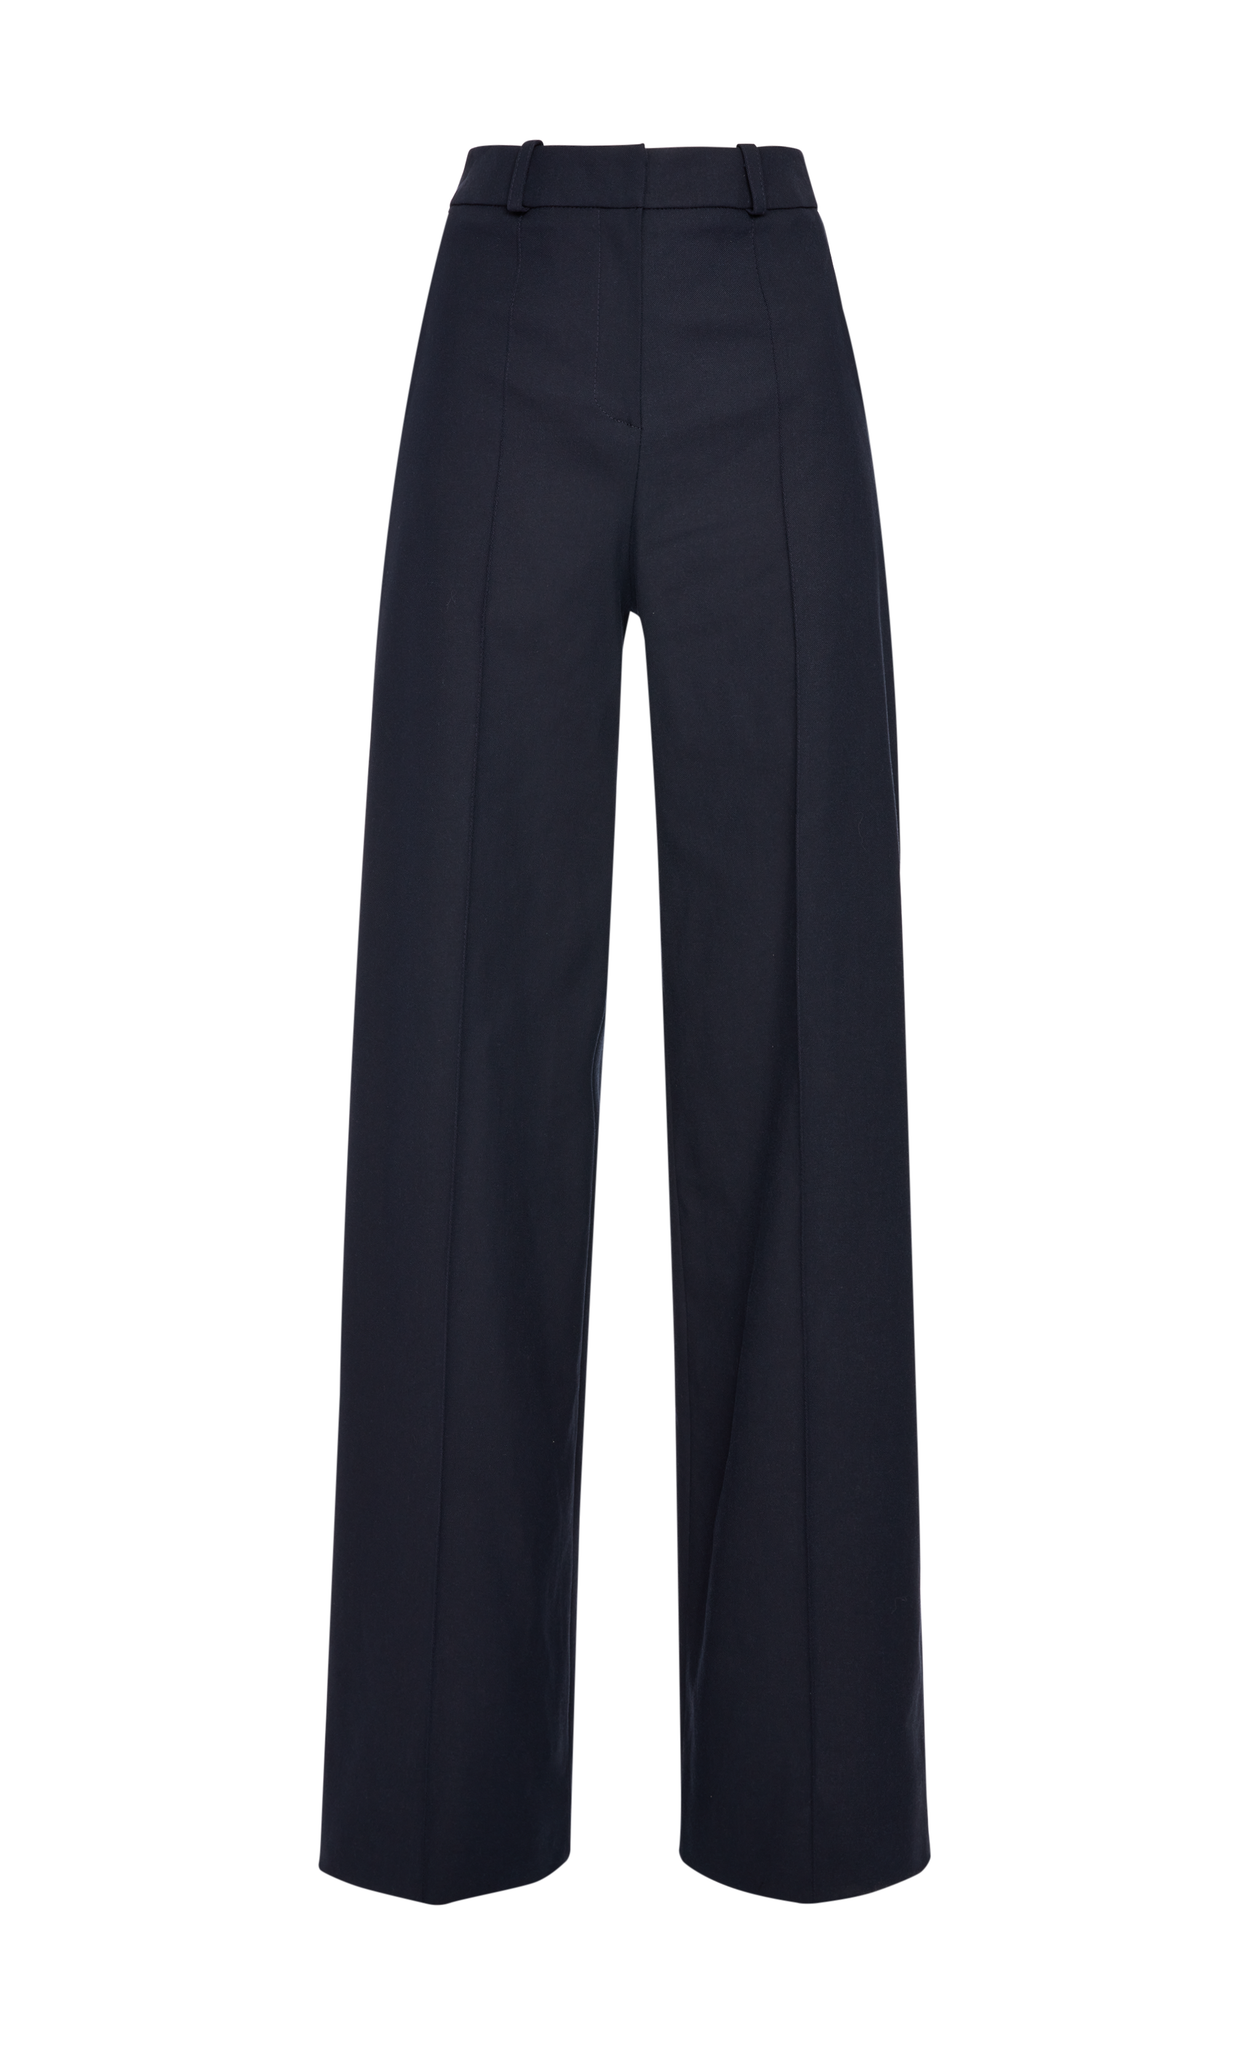 GRACE NAVY TROUSER – Mother of Pearl